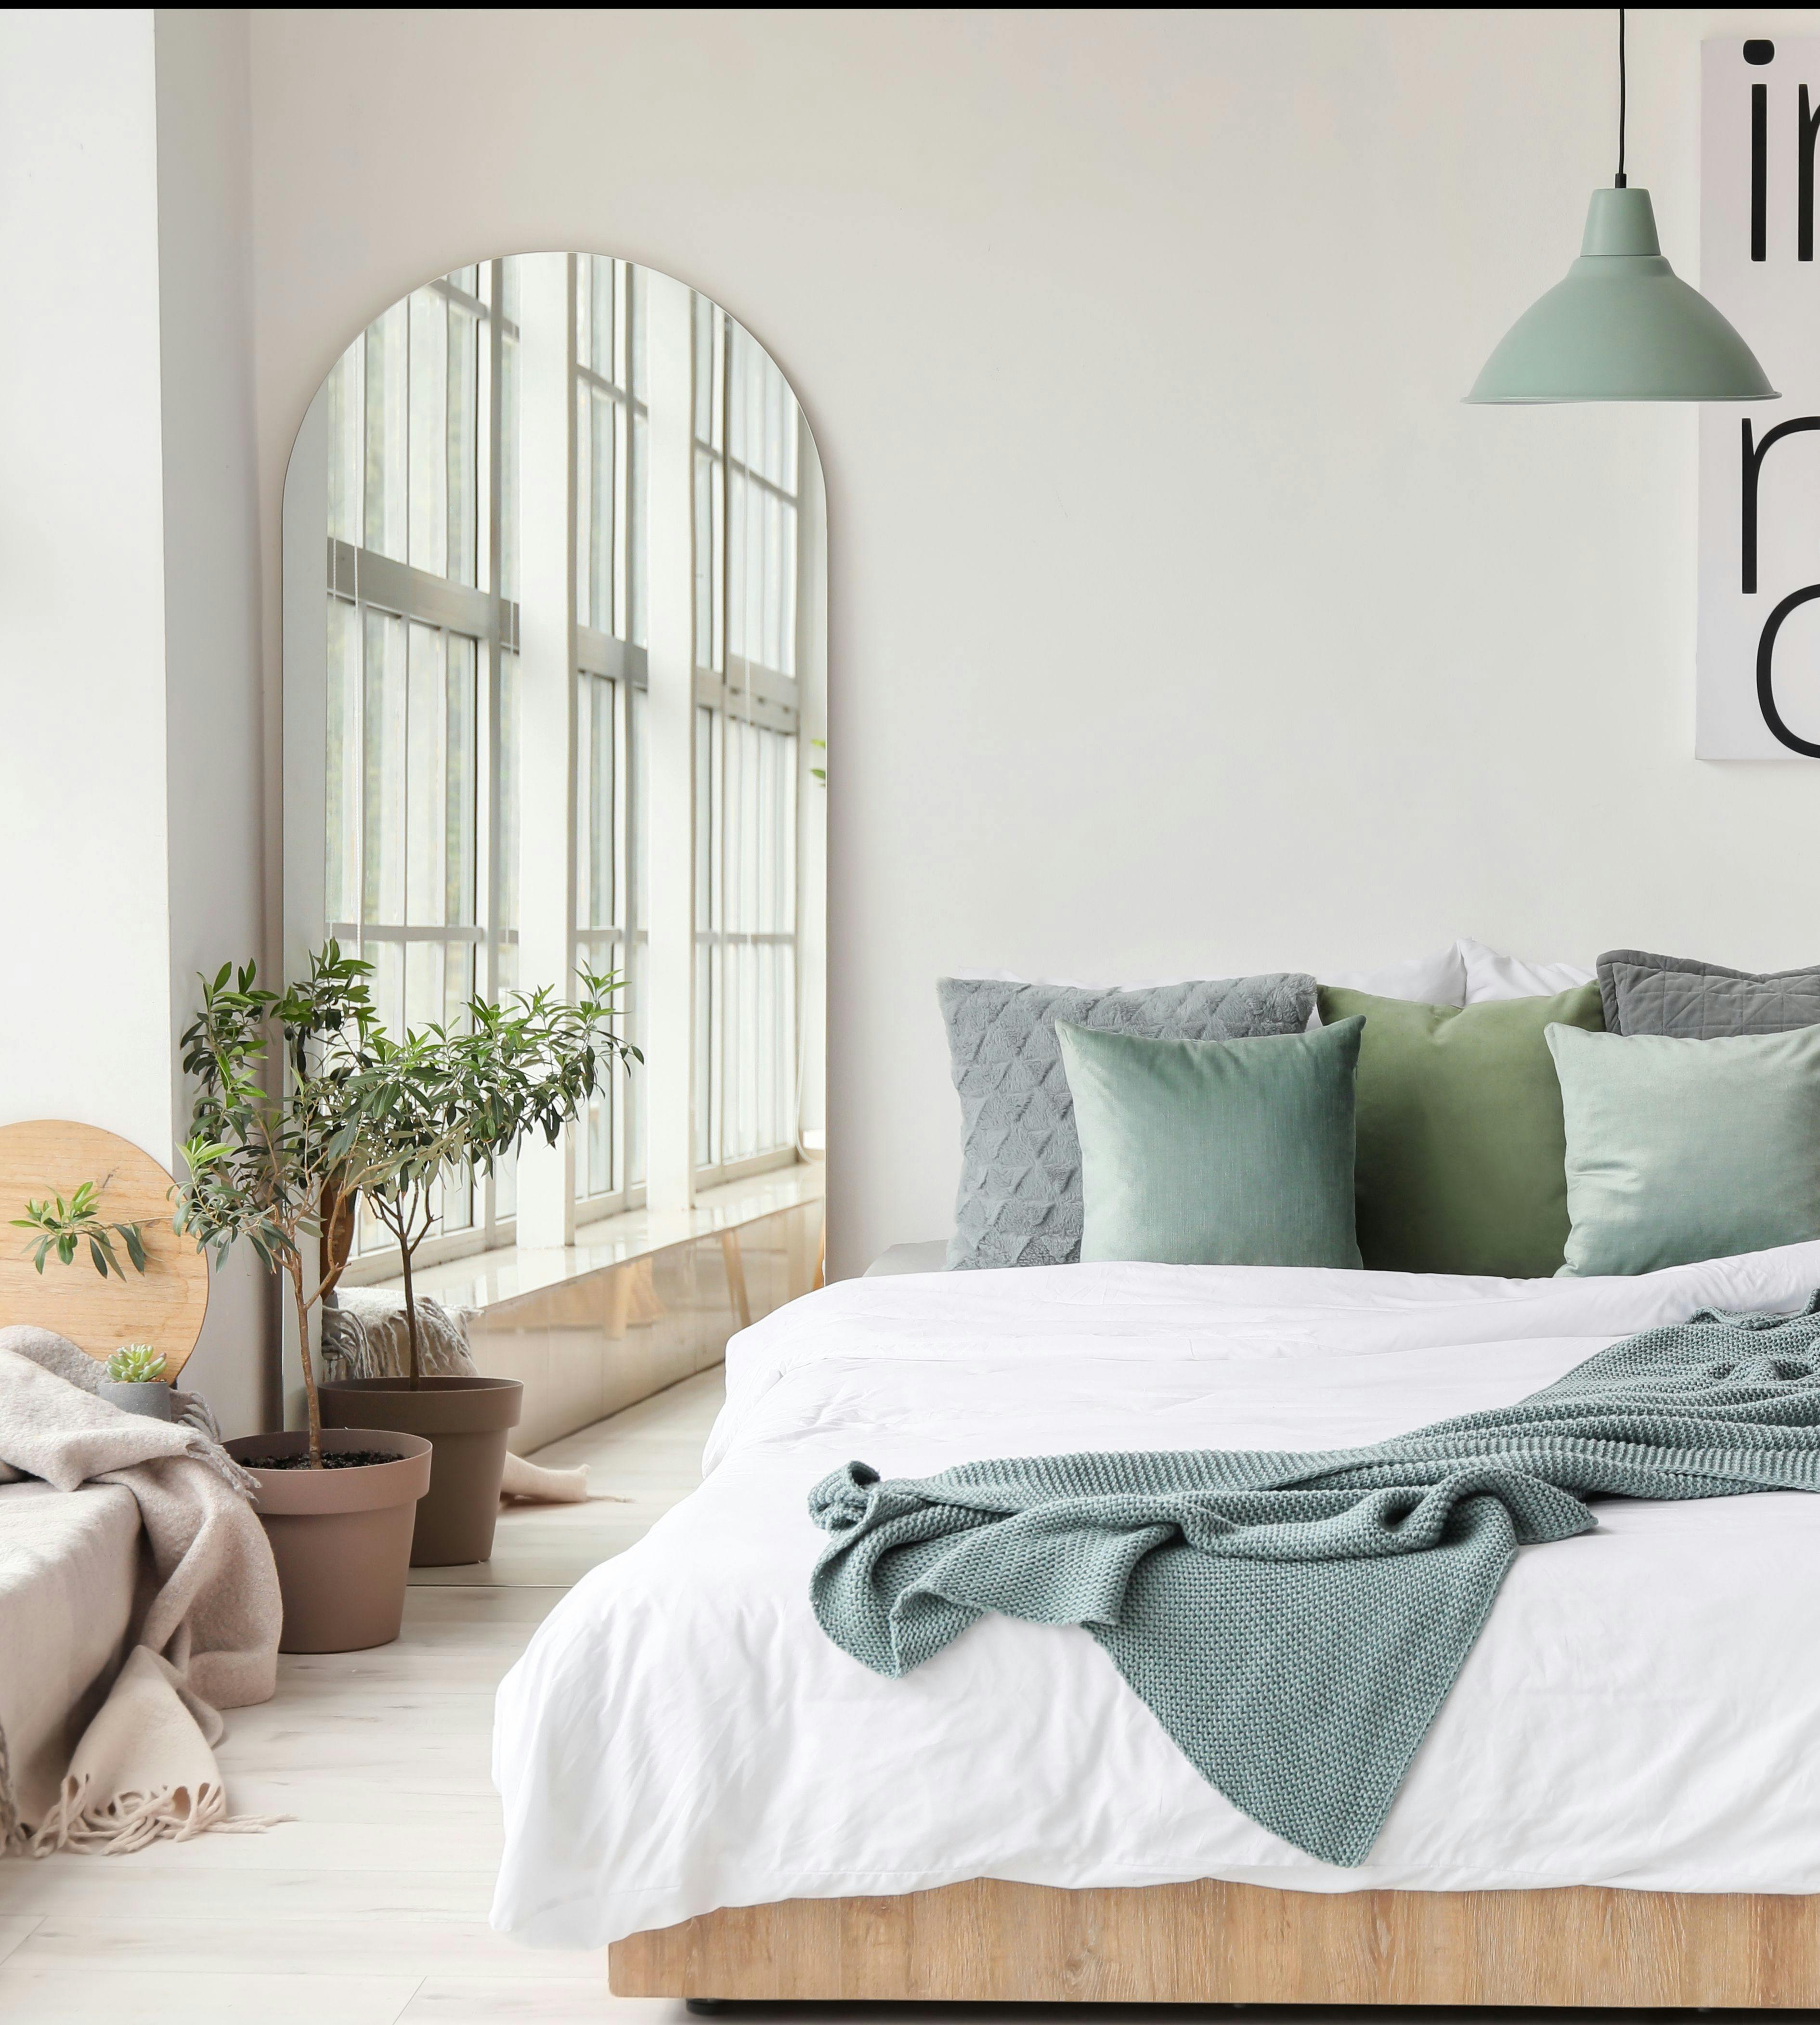 A serene white bedroom featuring a bed with green pillows and white bedding, adorned with a green throw blanket. A curved oval mirror leans against the wall, accompanied by a vibrant potted plant in a planter placed at its base. Light wood floors complete